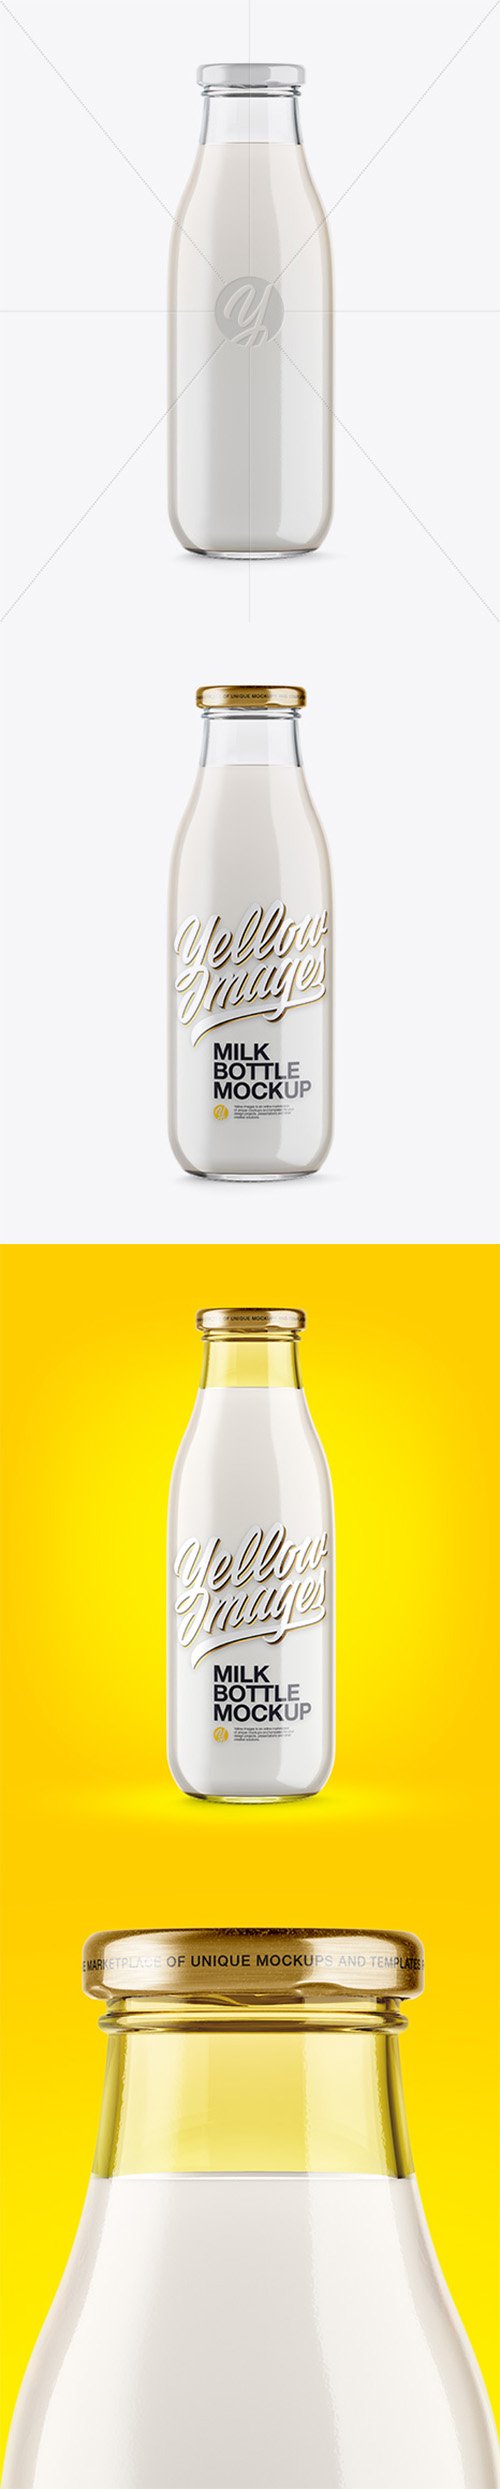 500ml Clear Glass Bottle With Milk Mockup 24767 TIF